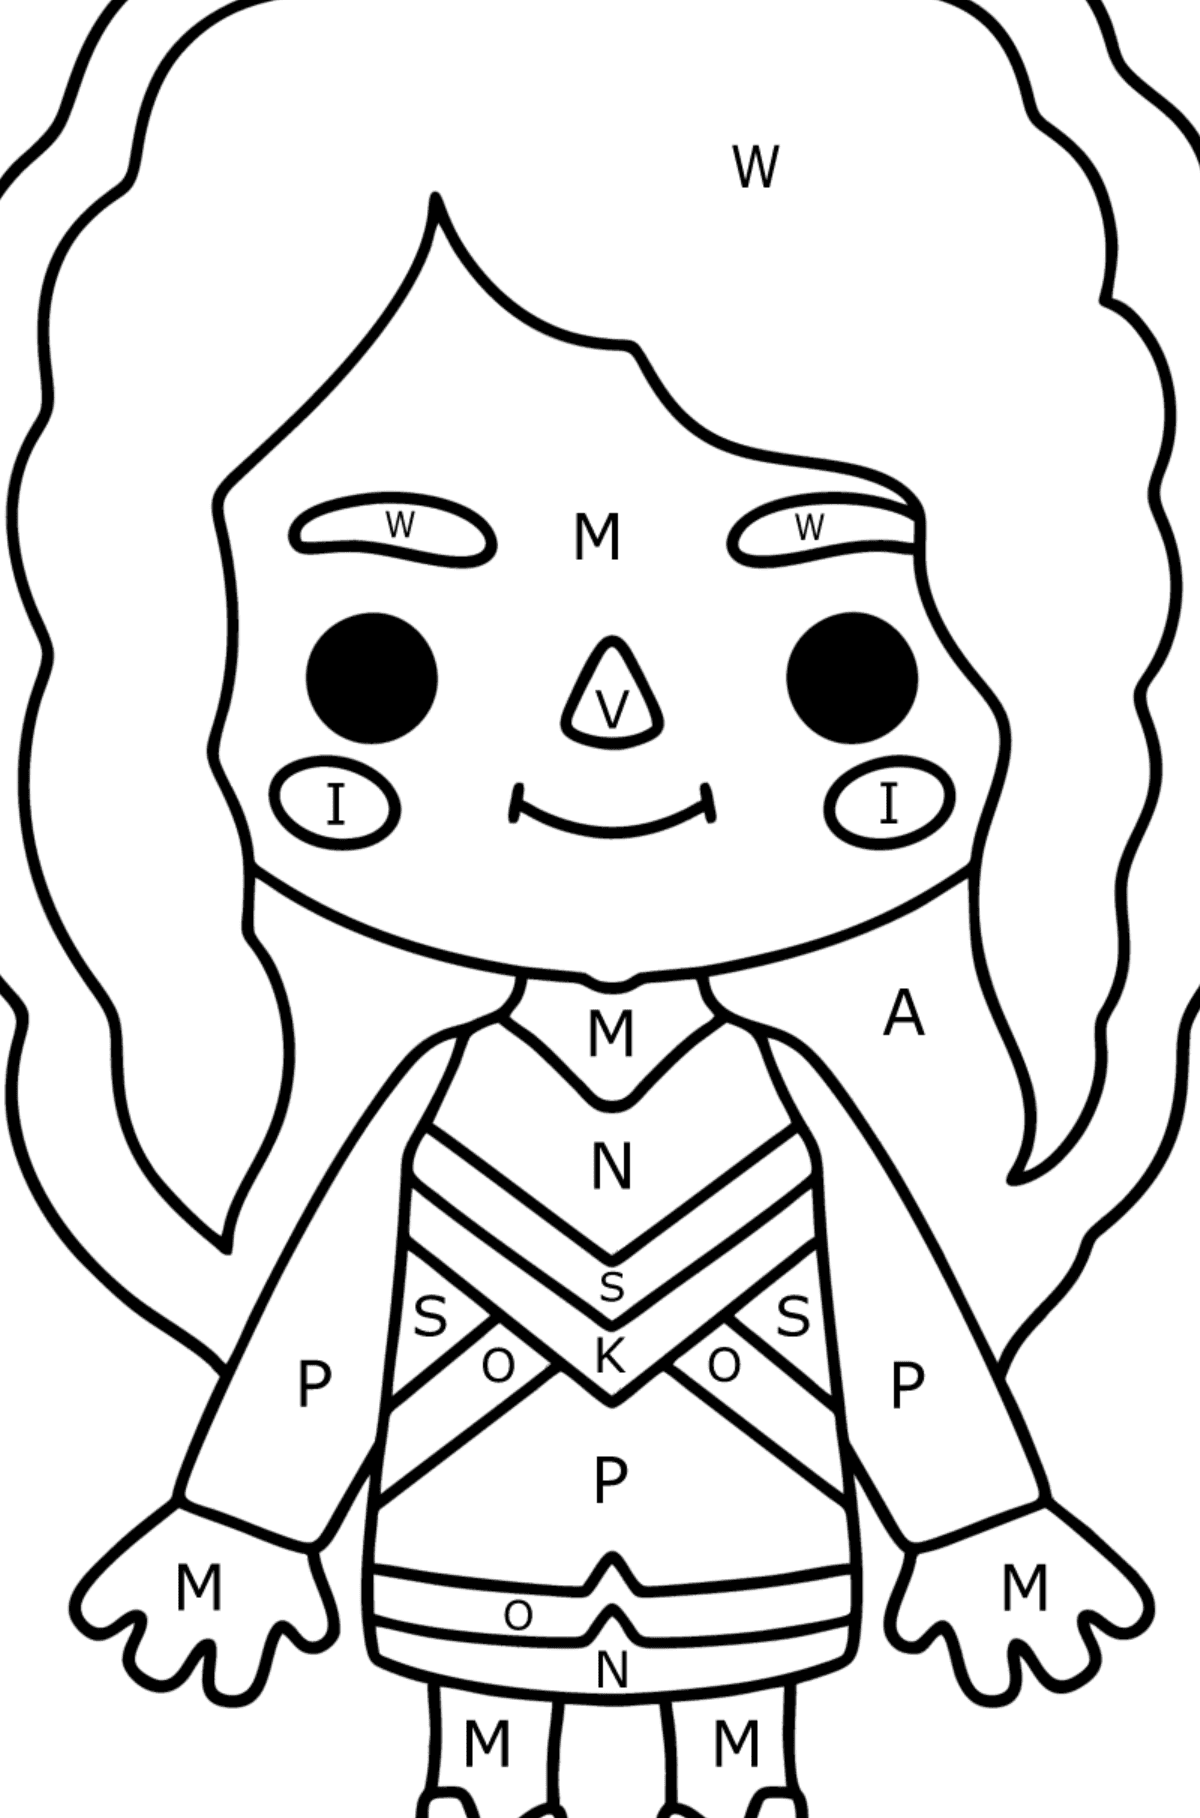 Coloring page Girl tocaboca 03 - Coloring by Letters for Kids